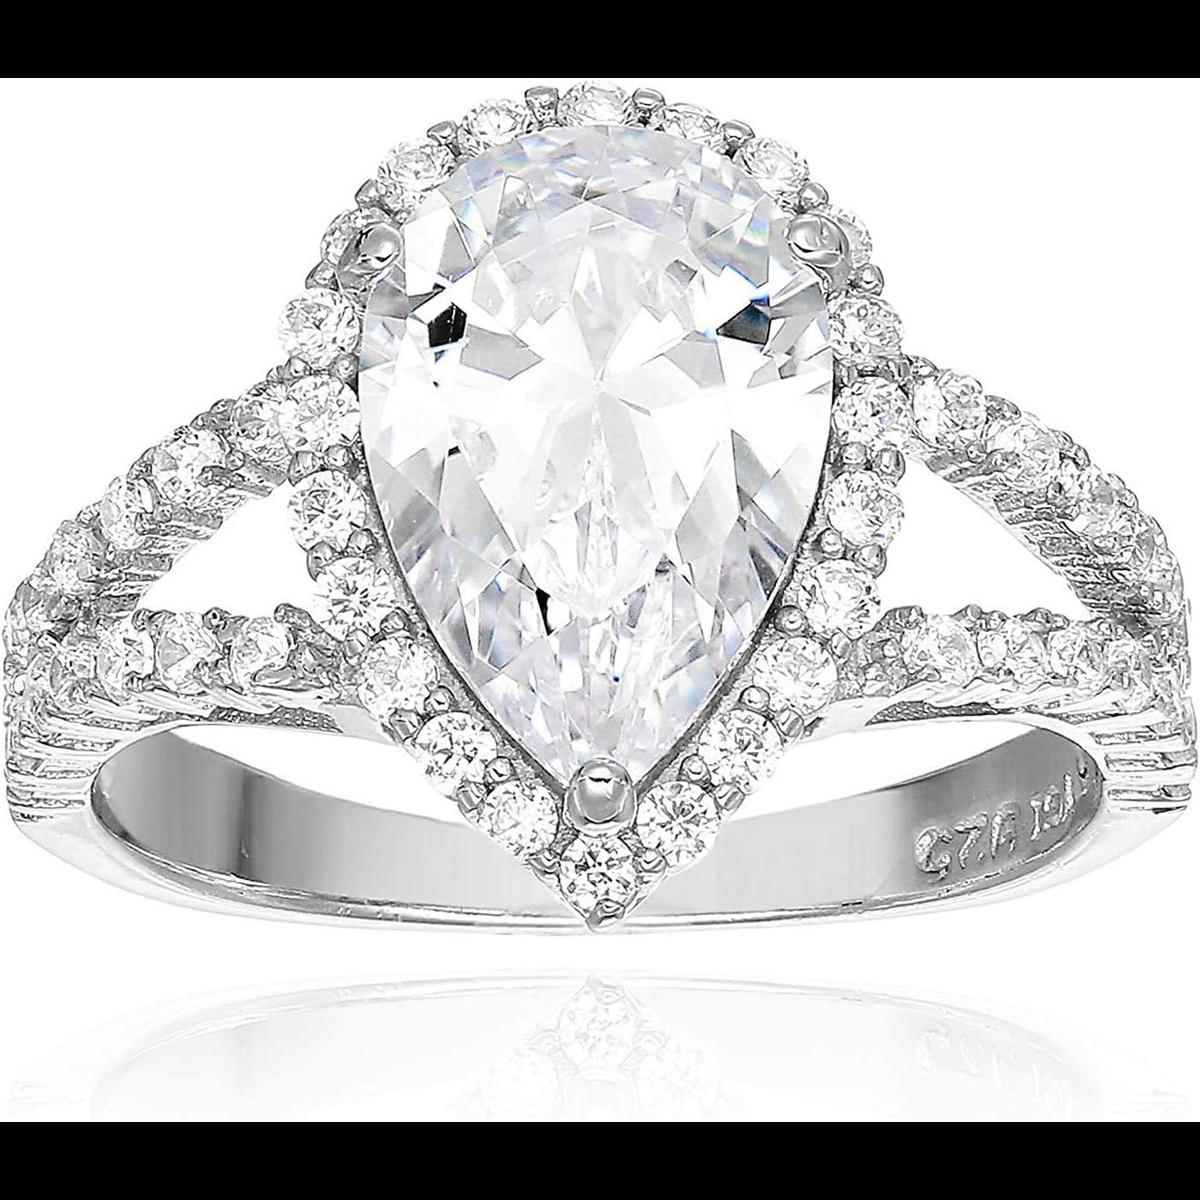 DECADENCE Sterling Silver mm Pear Cut Halo Split Shank Cubic Zirconia Engagement Ring size 9